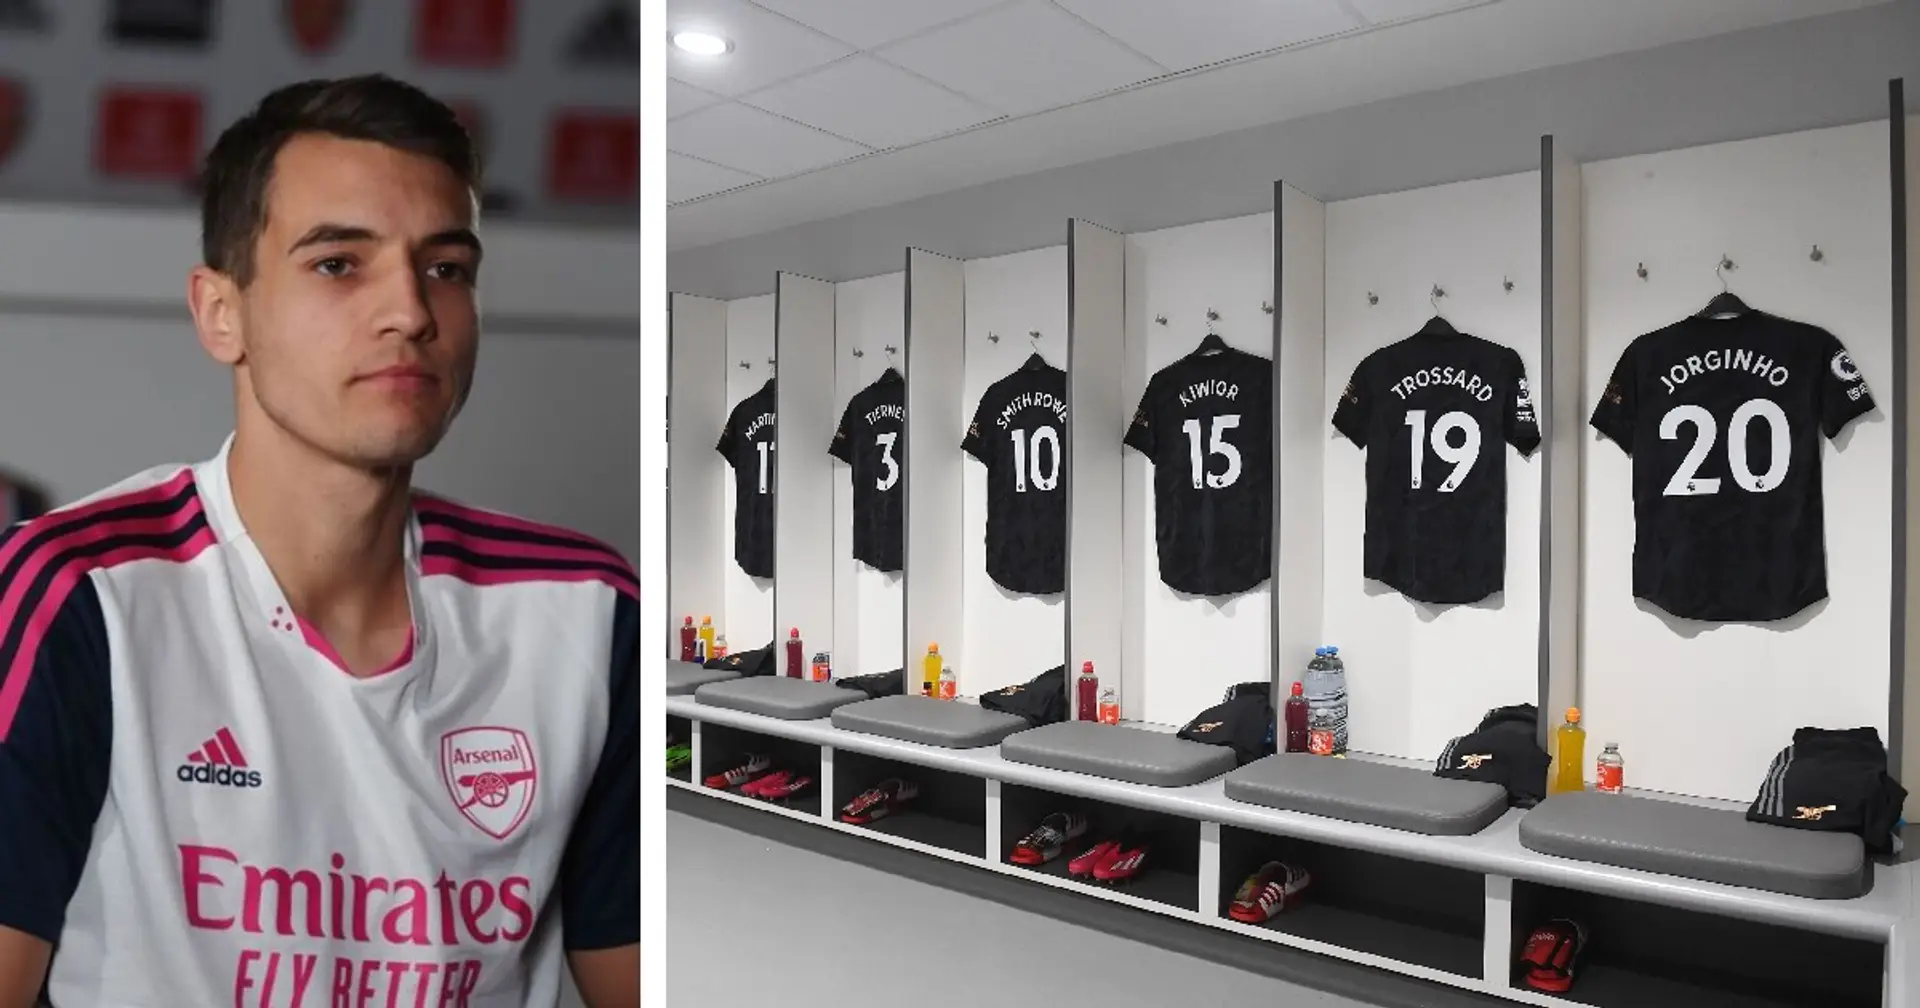 Kiwior names player who introduced him to other Arsenal teammates in the dressing room